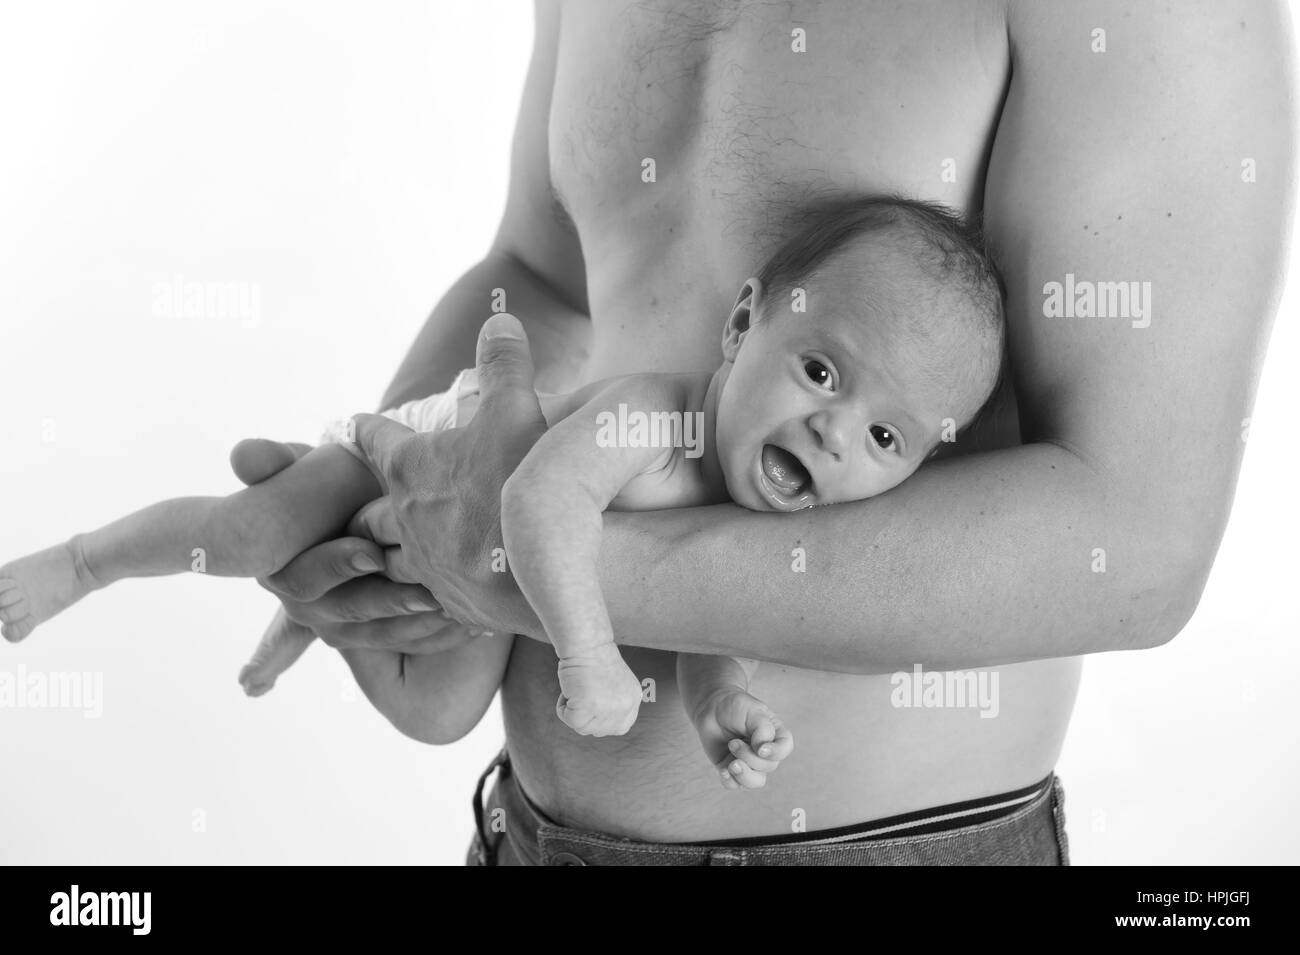 Model released , Vater mit Neugeborenem im Arm - father with baby Stock Photo